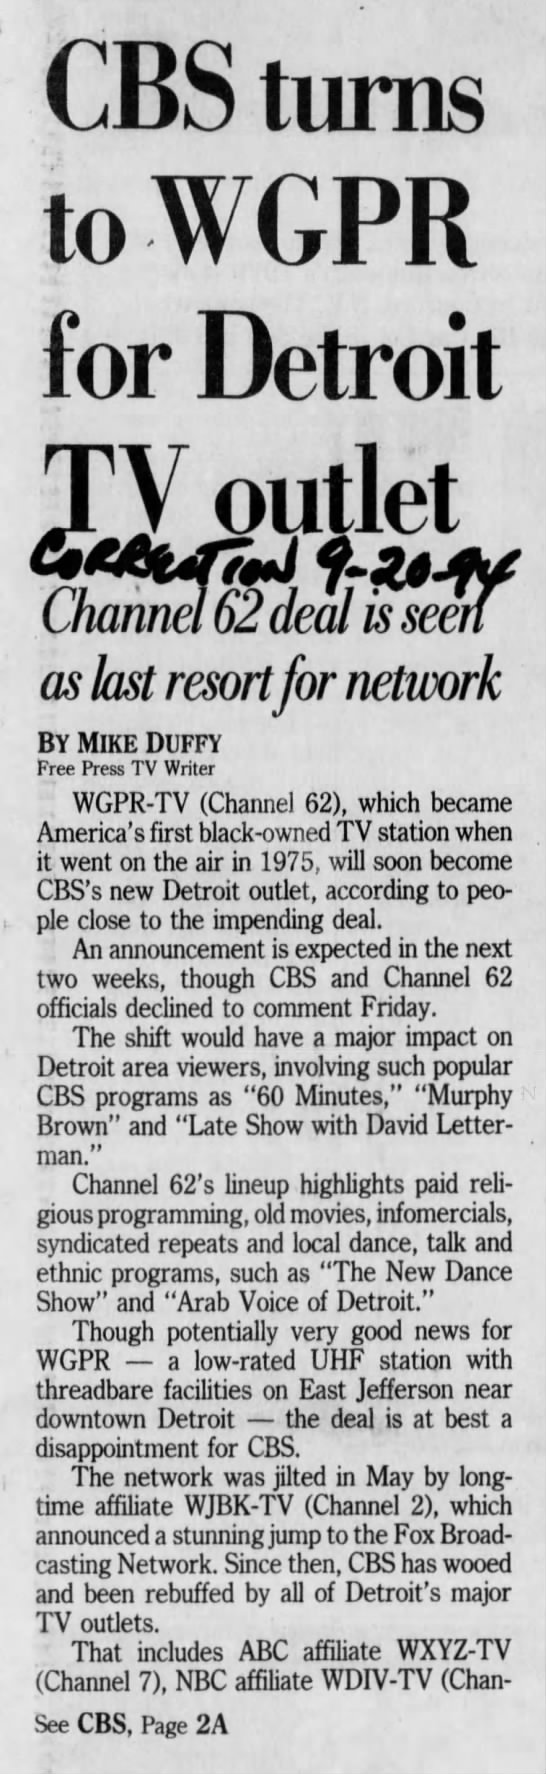 CBS turns to WGPR for Detroit TV outlet: Channel 62 is seen as last resort for network - 